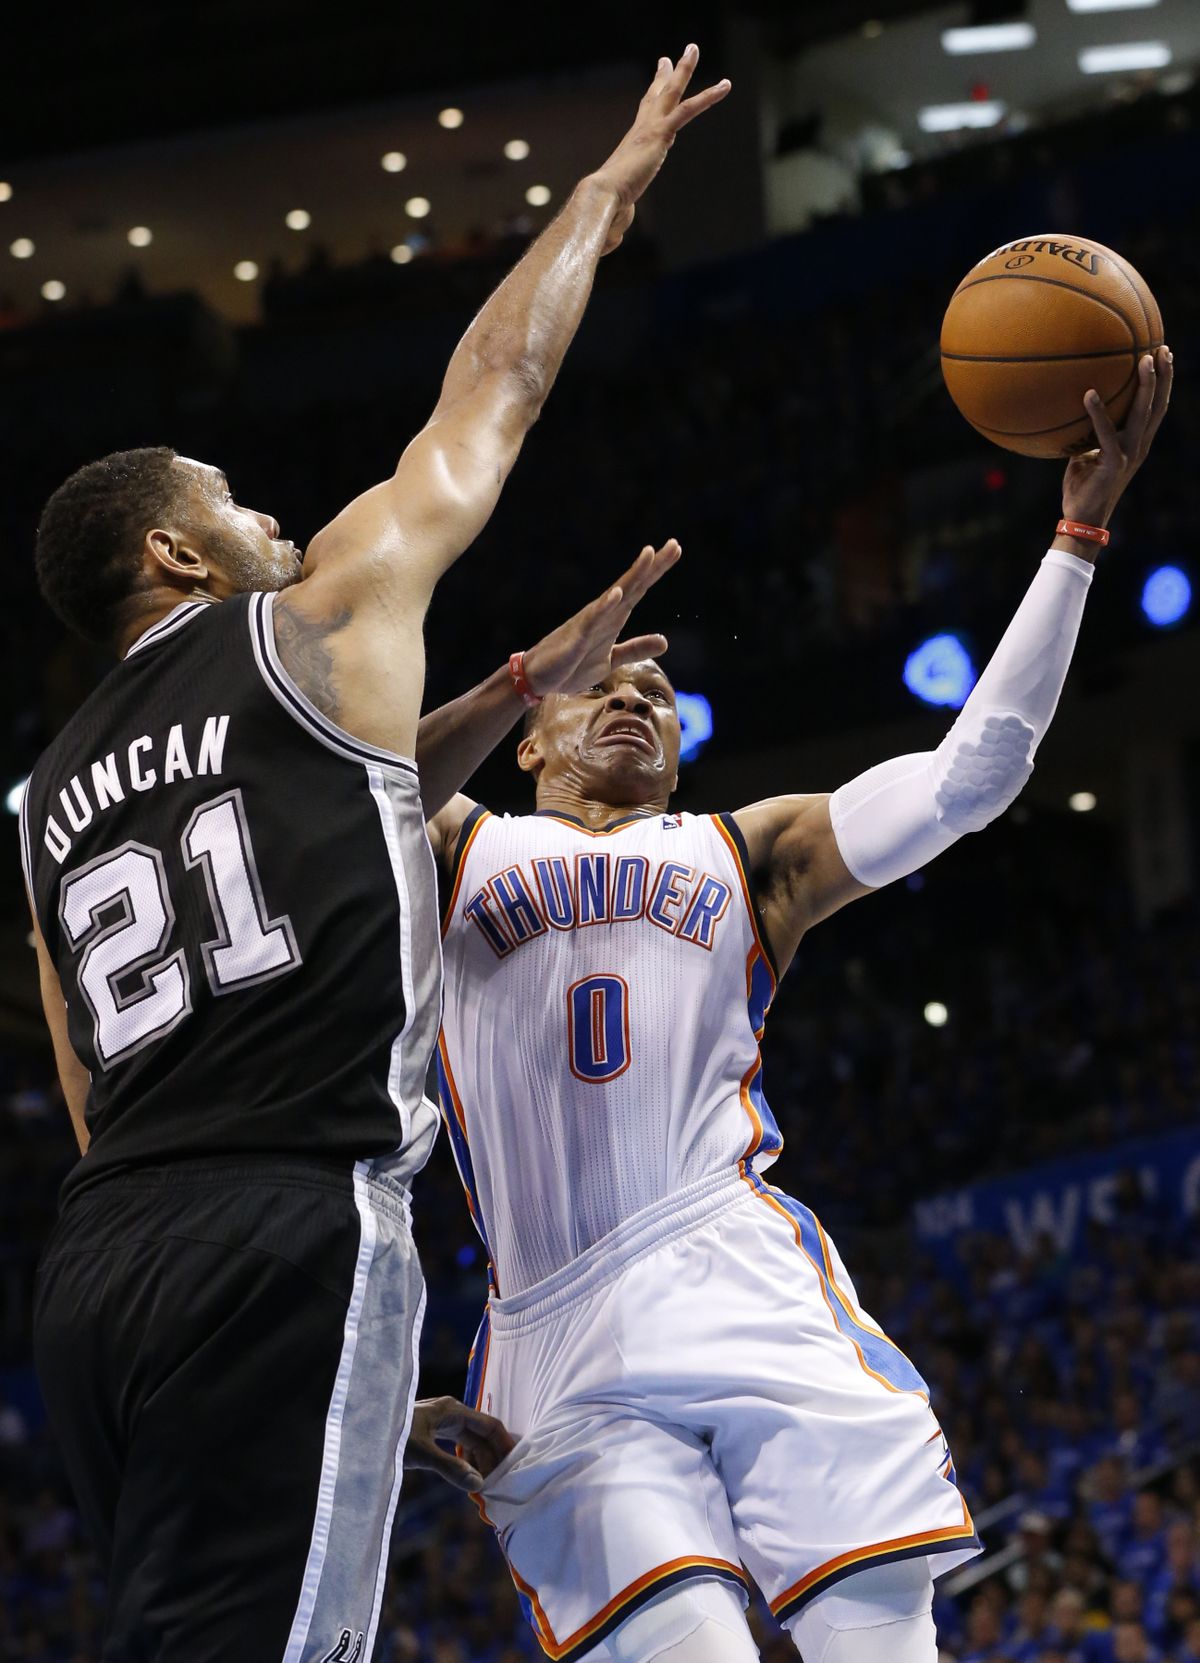 Russell Westbrook, who led the Thunder with 26 points, puts up a shot against Spurs’ Tim Duncan. (Associated Press)